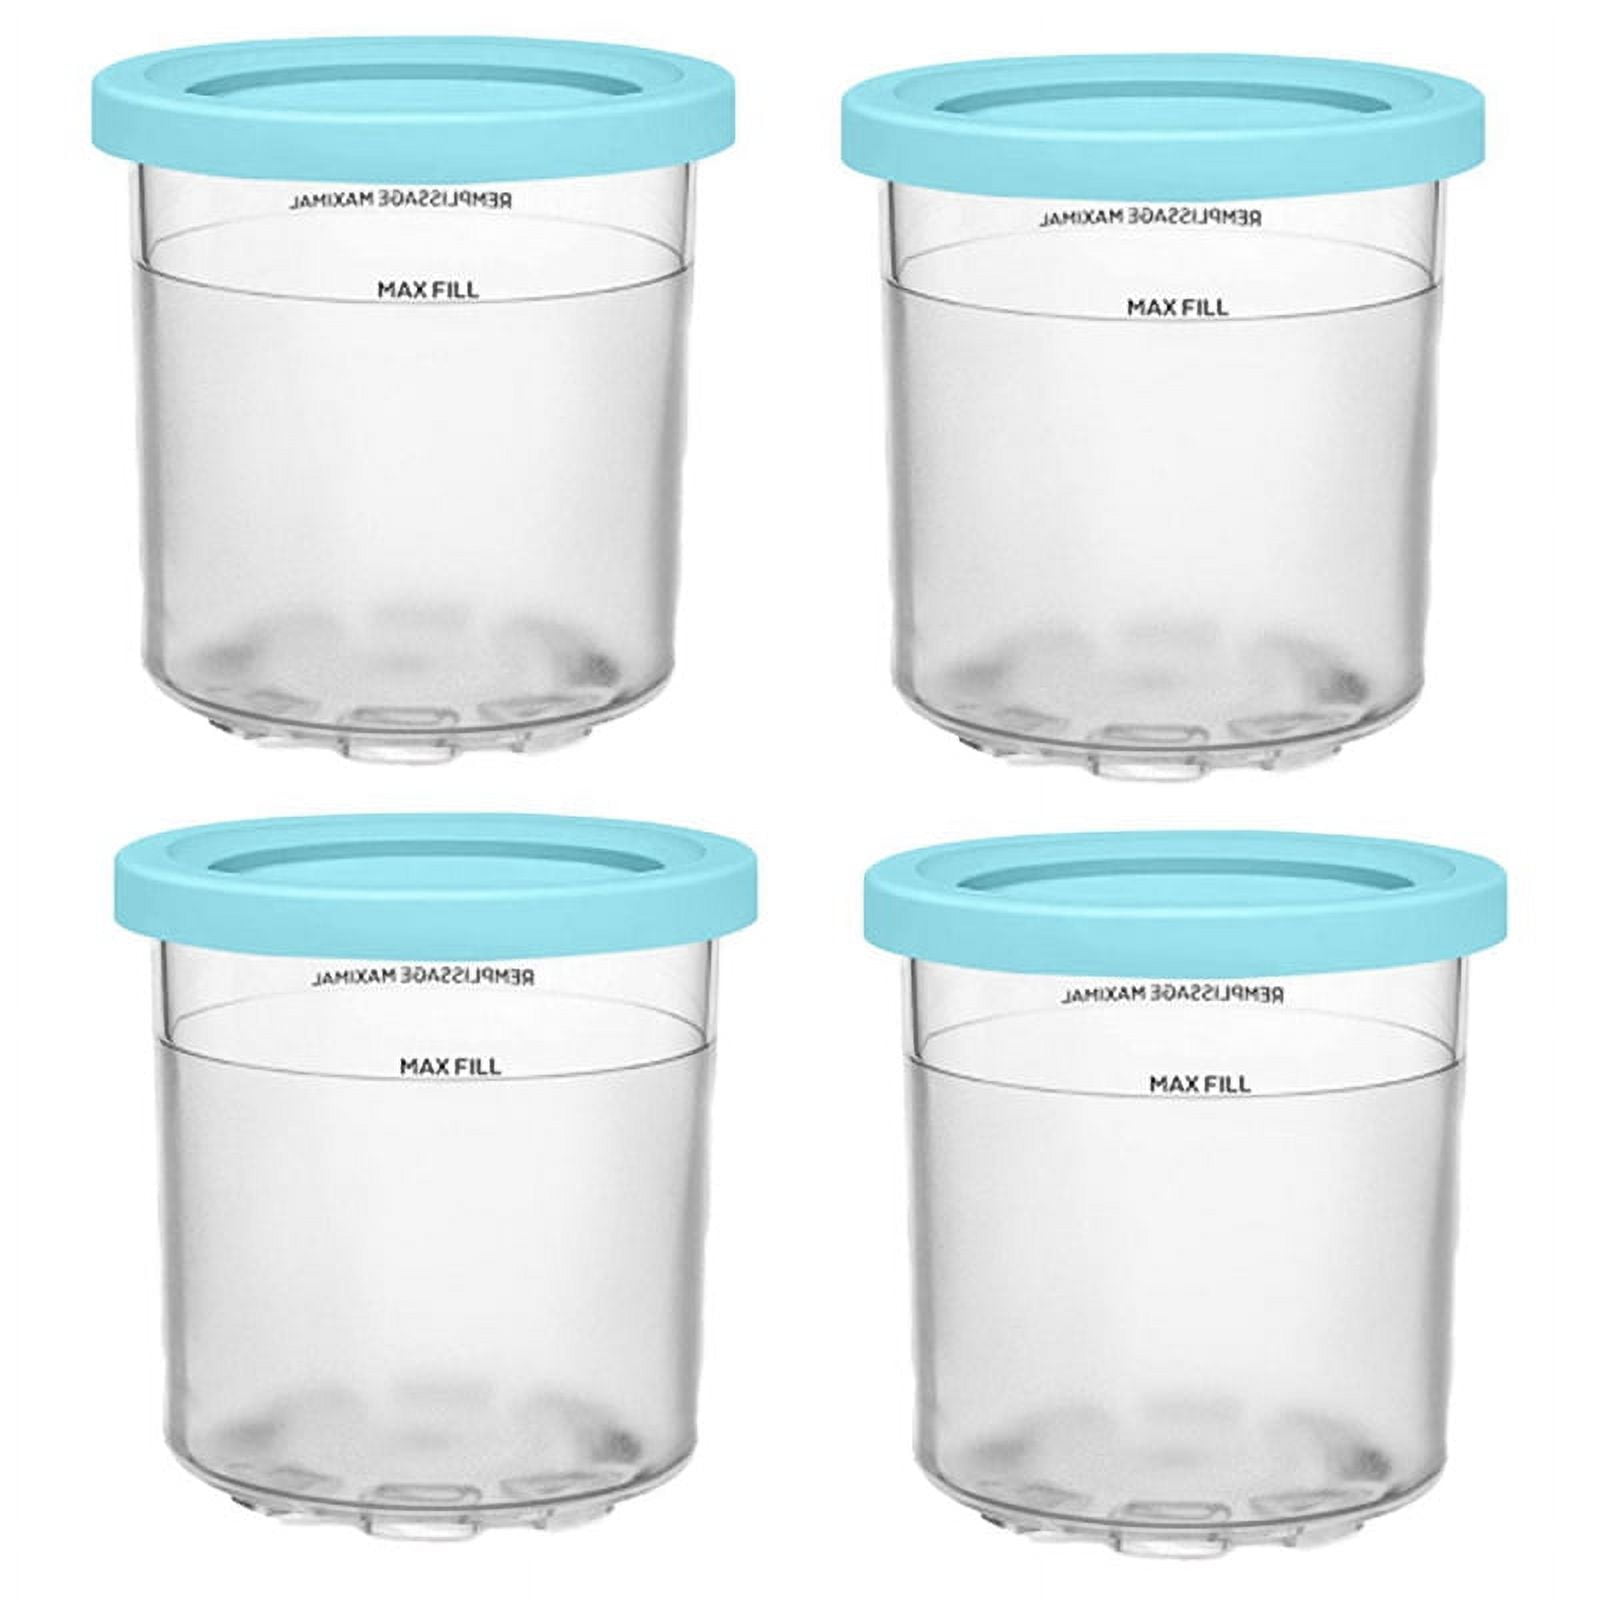 URRU Containers Replacement for Ninja Creami Pints and Lids - 4 Pack, 16oz  Cups Compatible with NC301 NC300 NC299AMZ Series Ice Cream Maker 